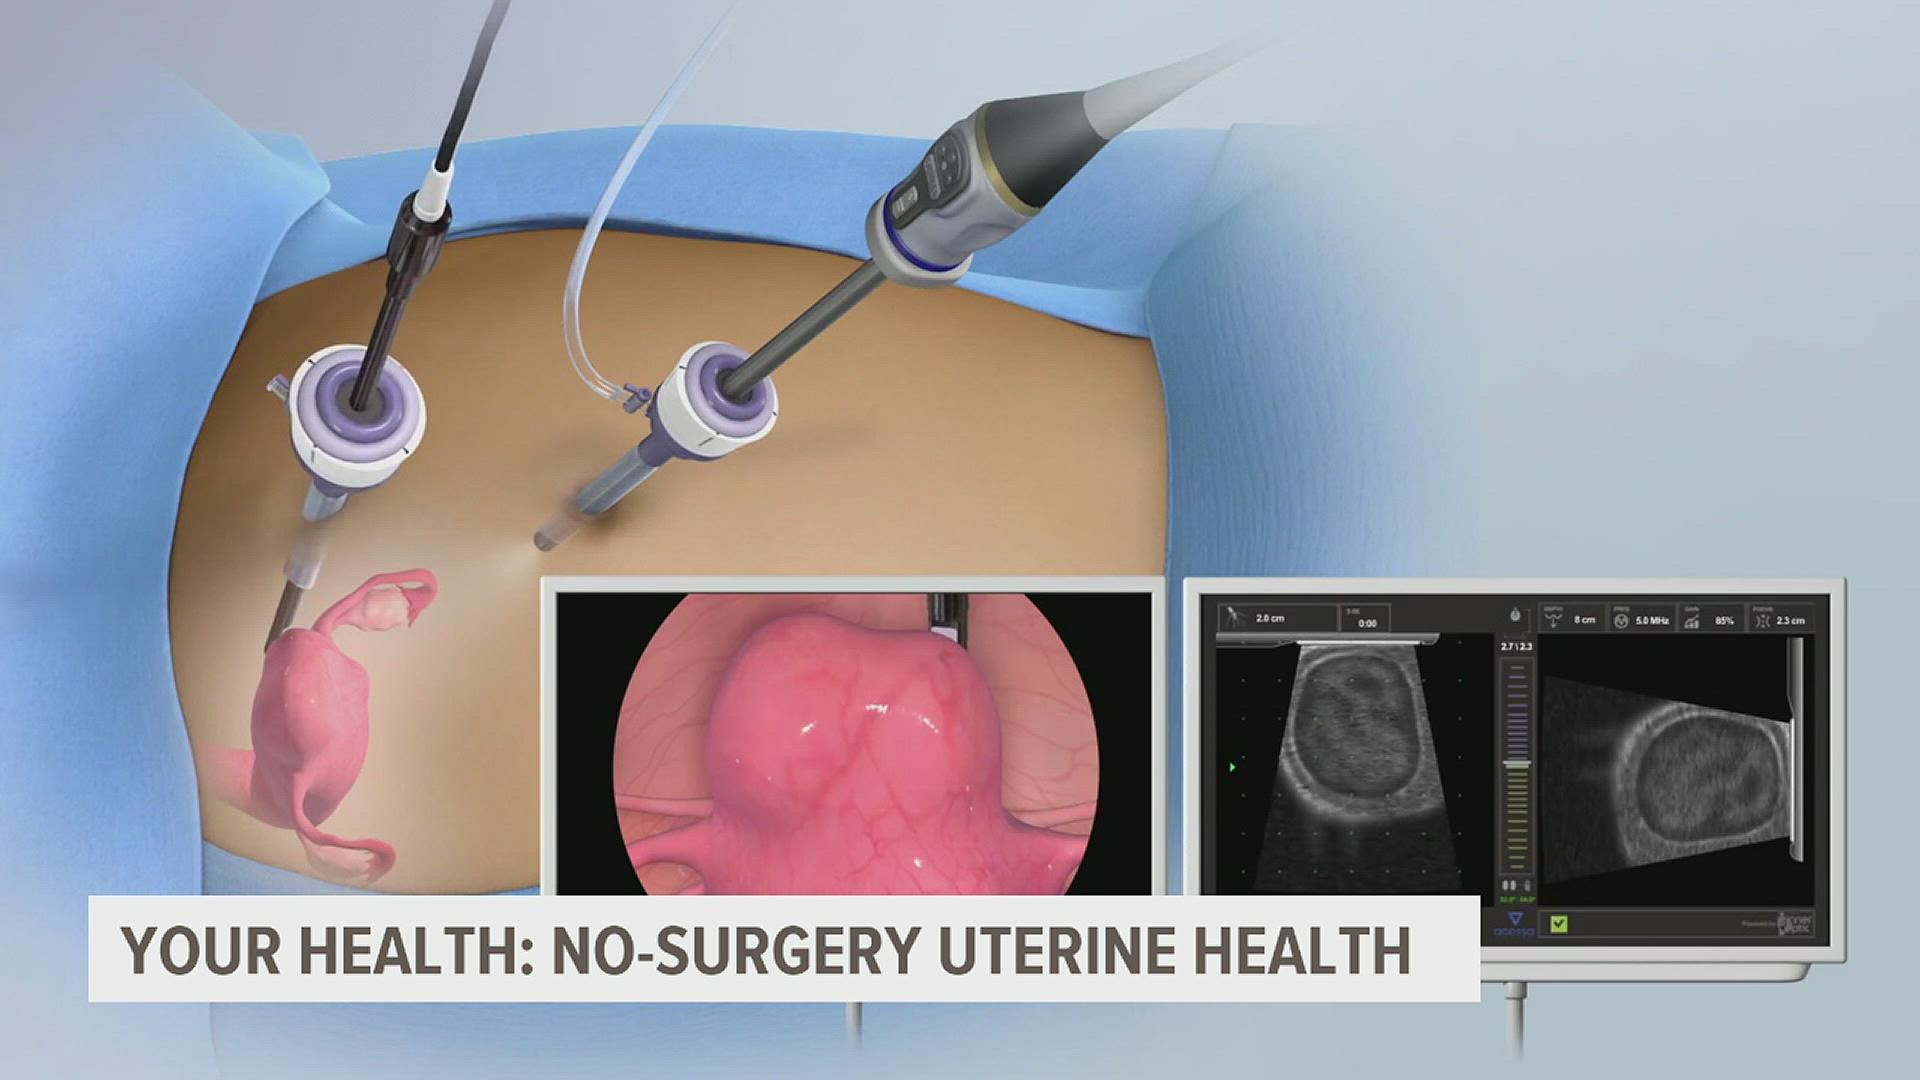 A new laparoscopic procedure is shrinking fibroids and helping women avoid invasive surgery.